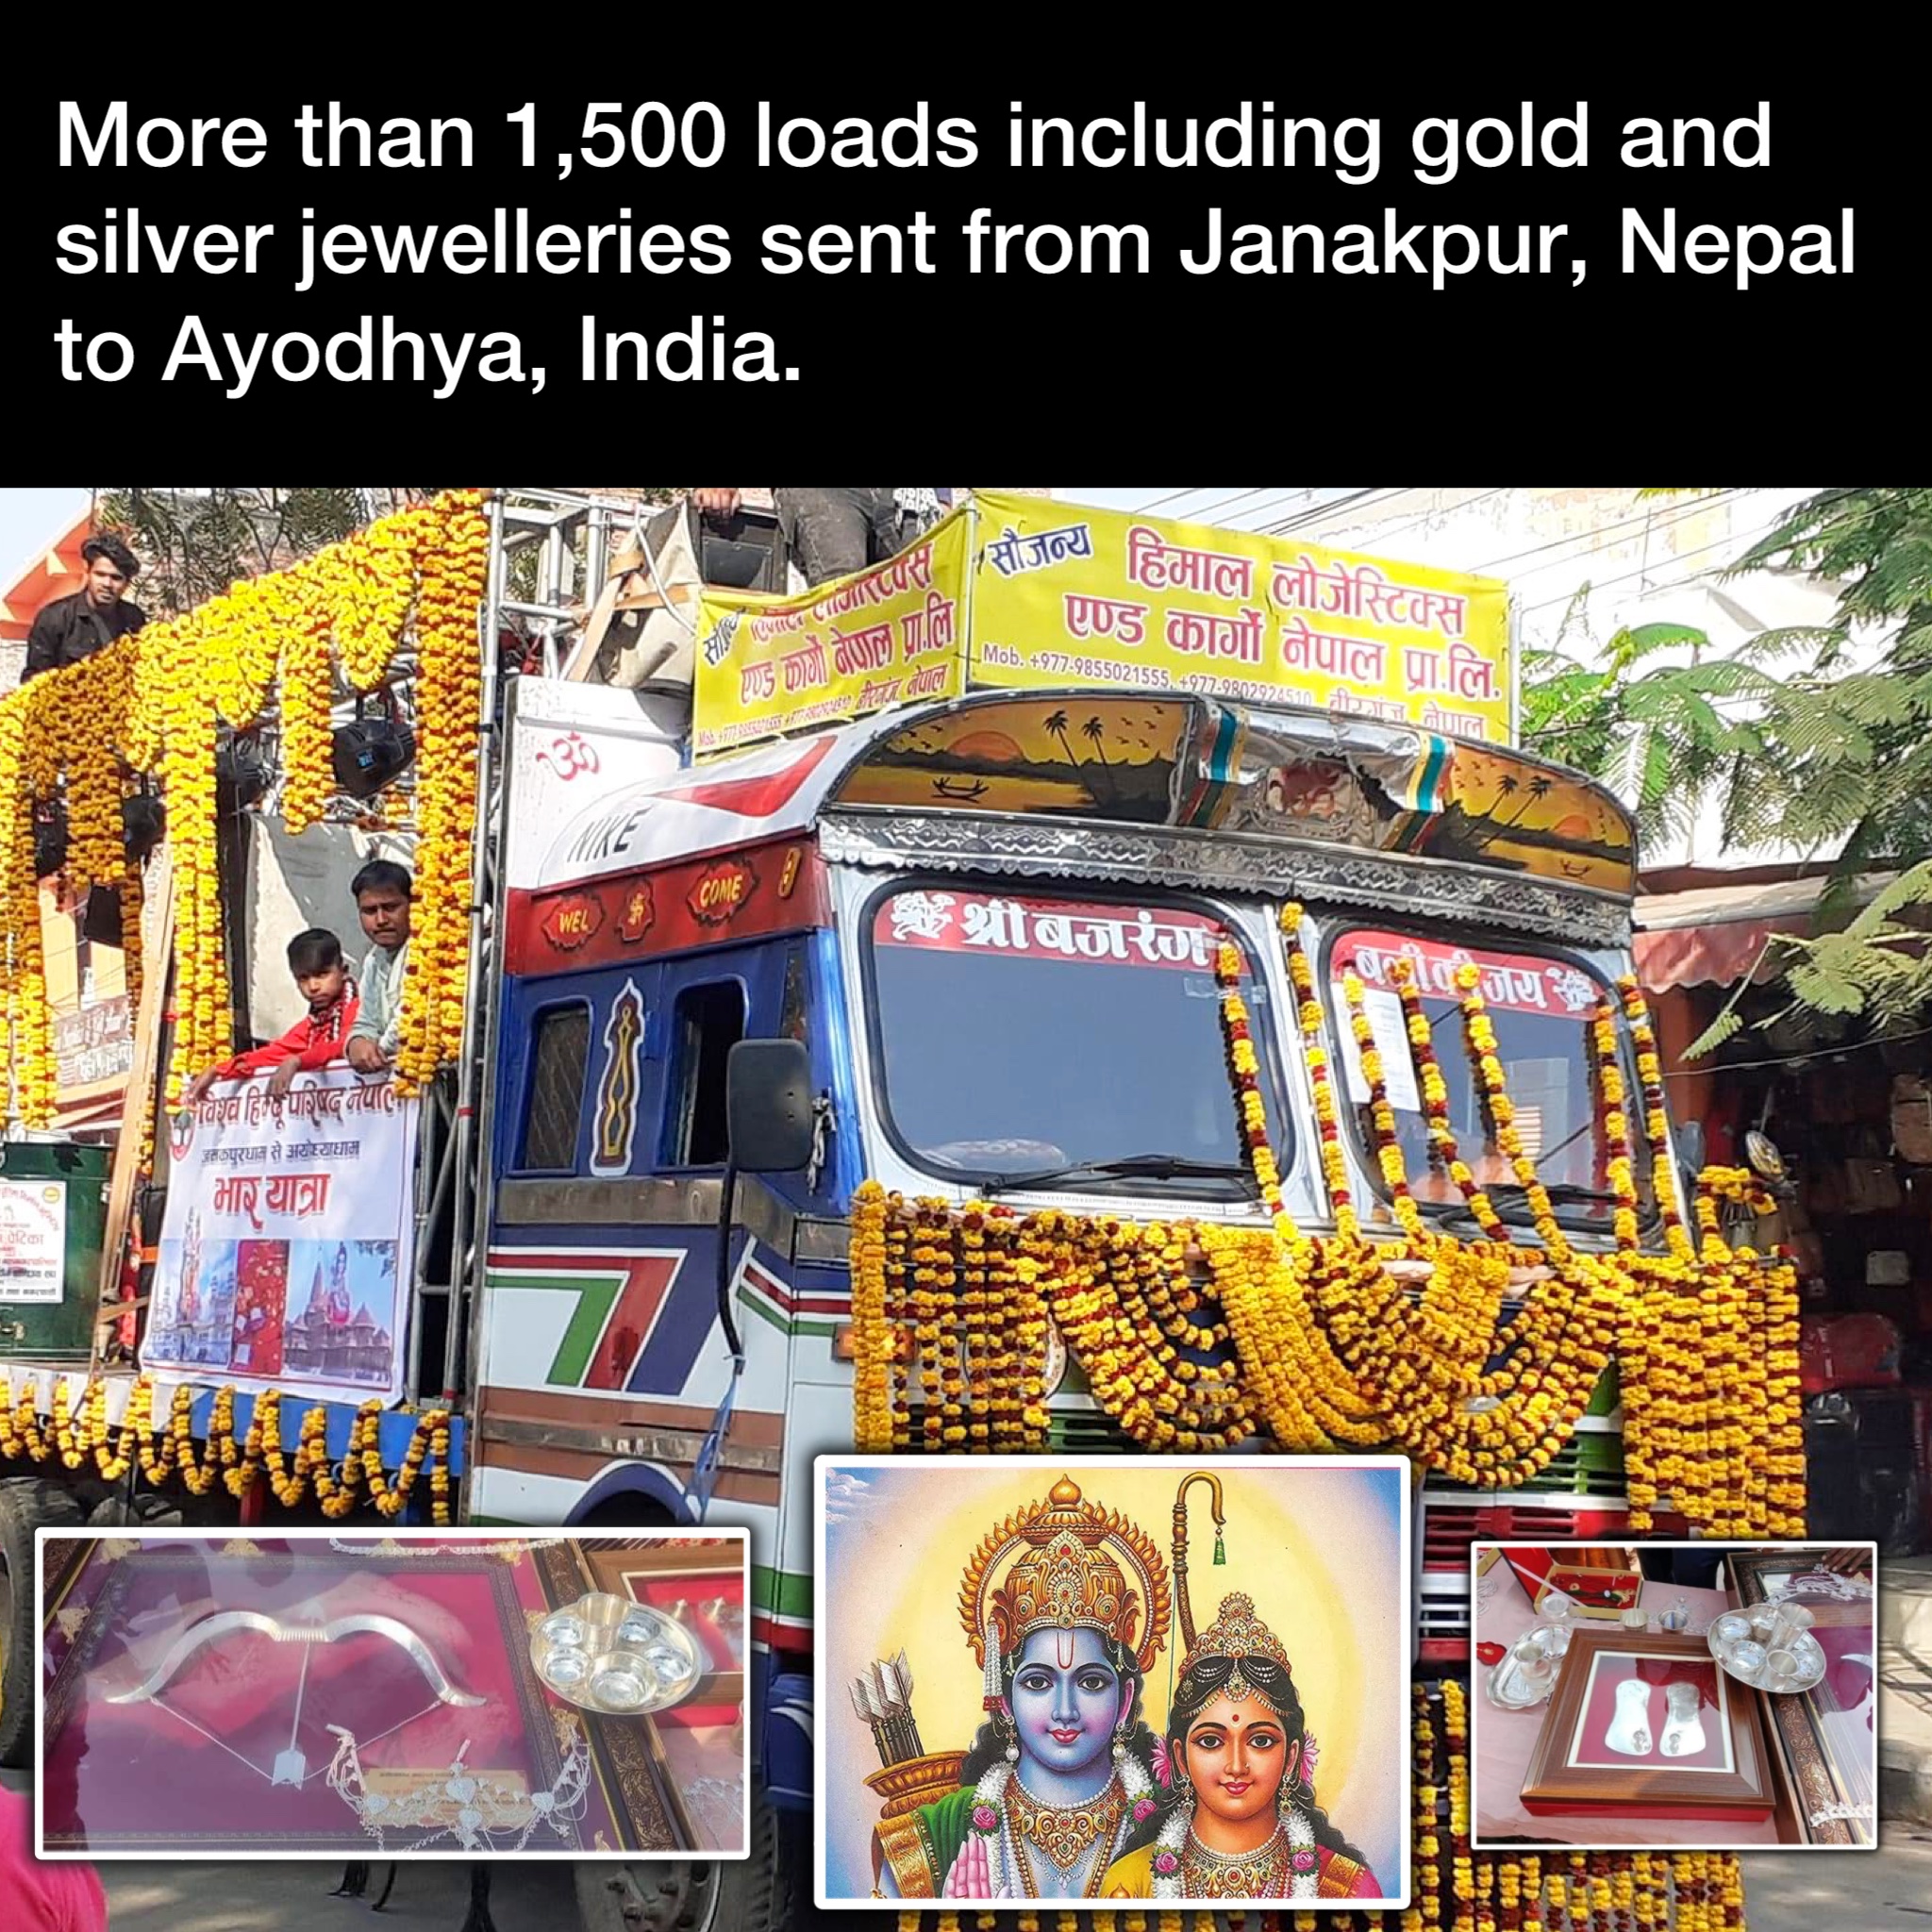 More than 1,500 loads including gold and silver jewelleries sent from Janakpur, Nepal to Ayodhya, India.